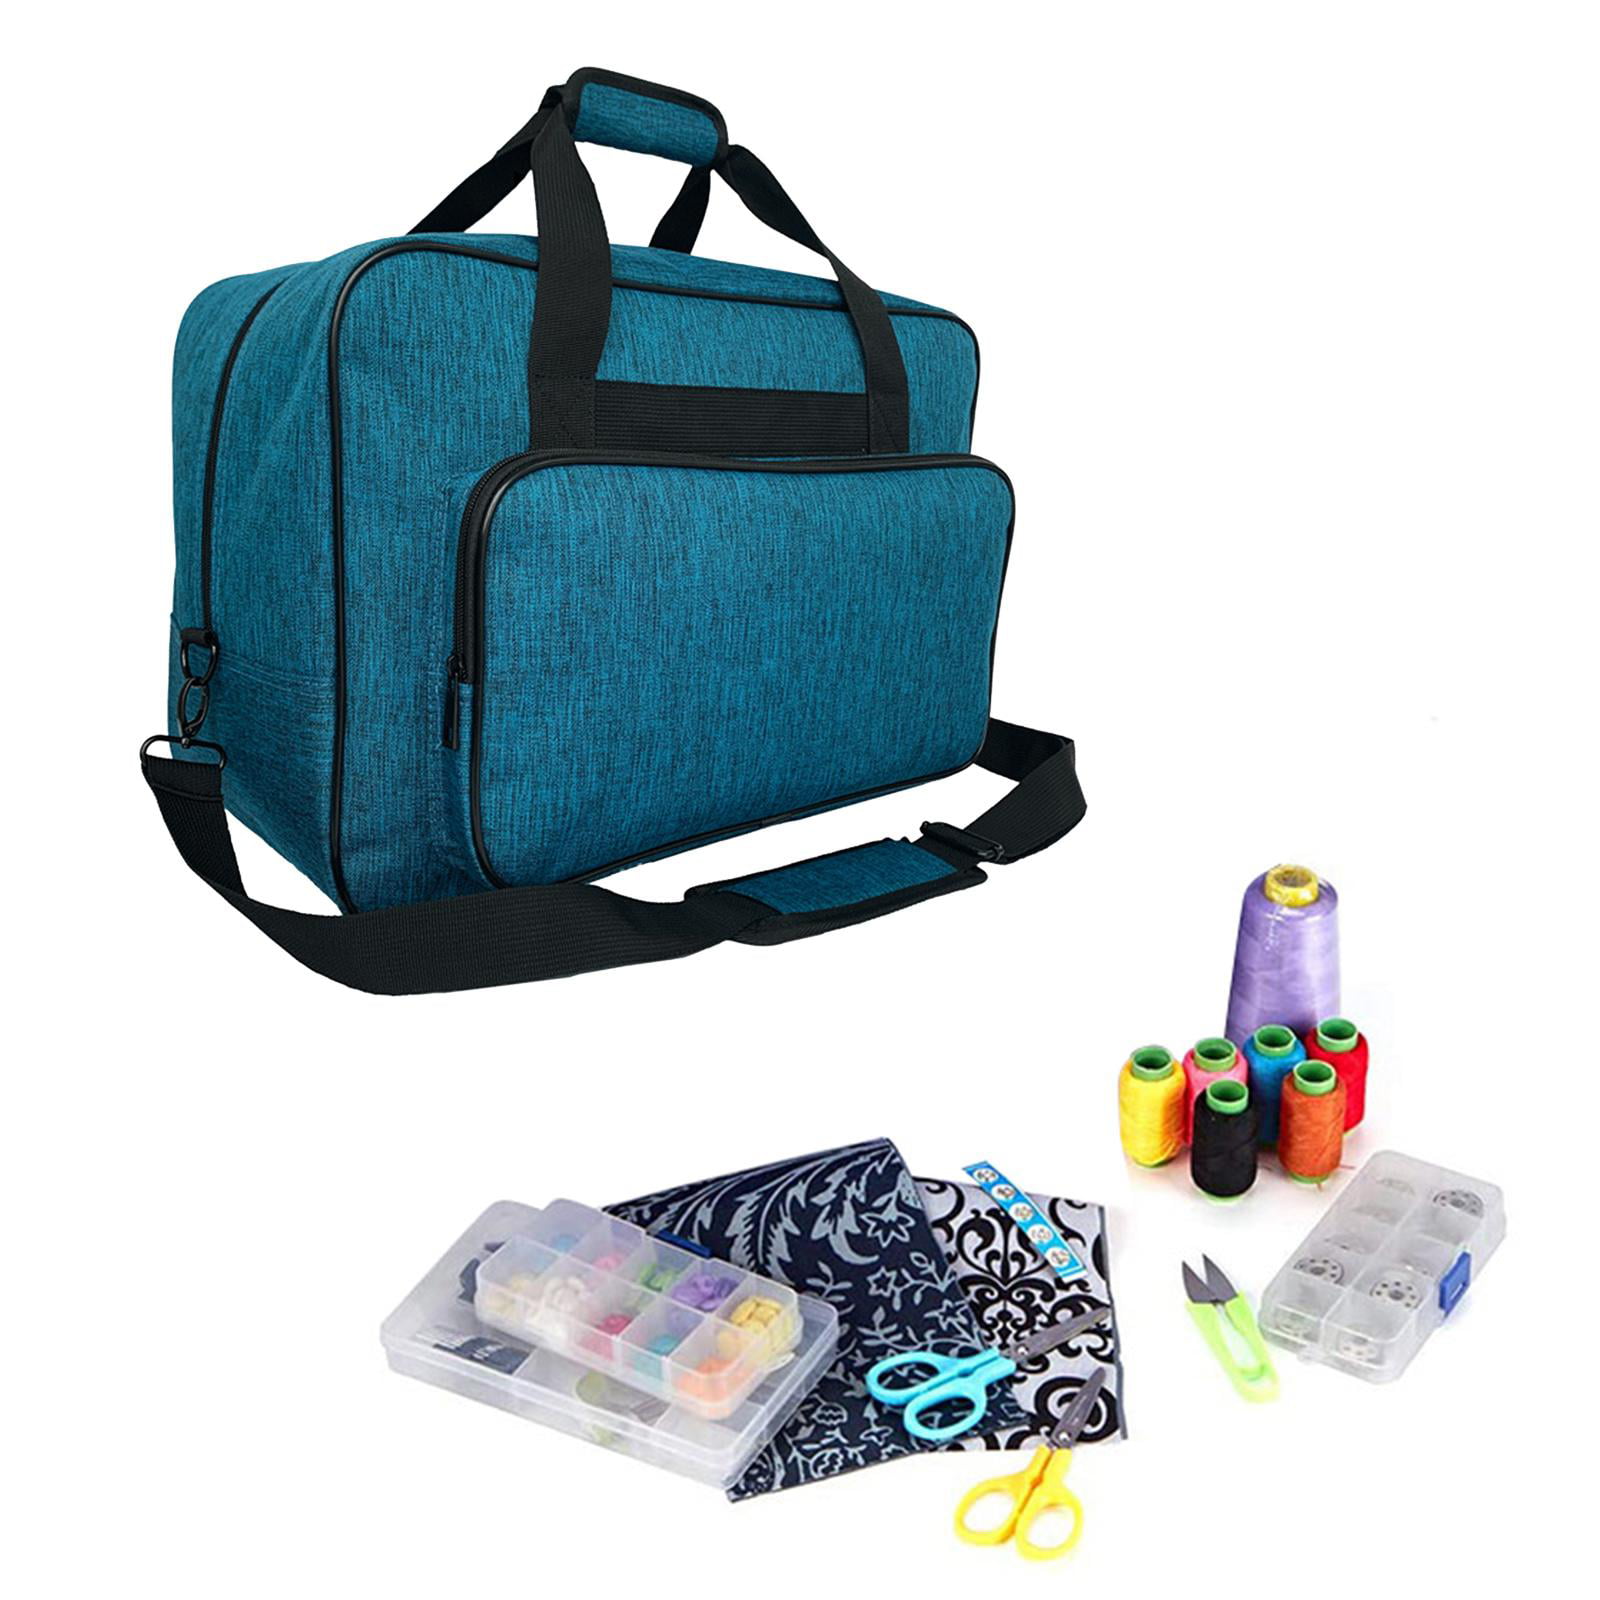 TLBTEK Blue Sewing Machine Carrying Case,Universal Canvas Carry Tote  Bag,Portable Padded Storage Dust Cover with Pockets for Sewing Machine